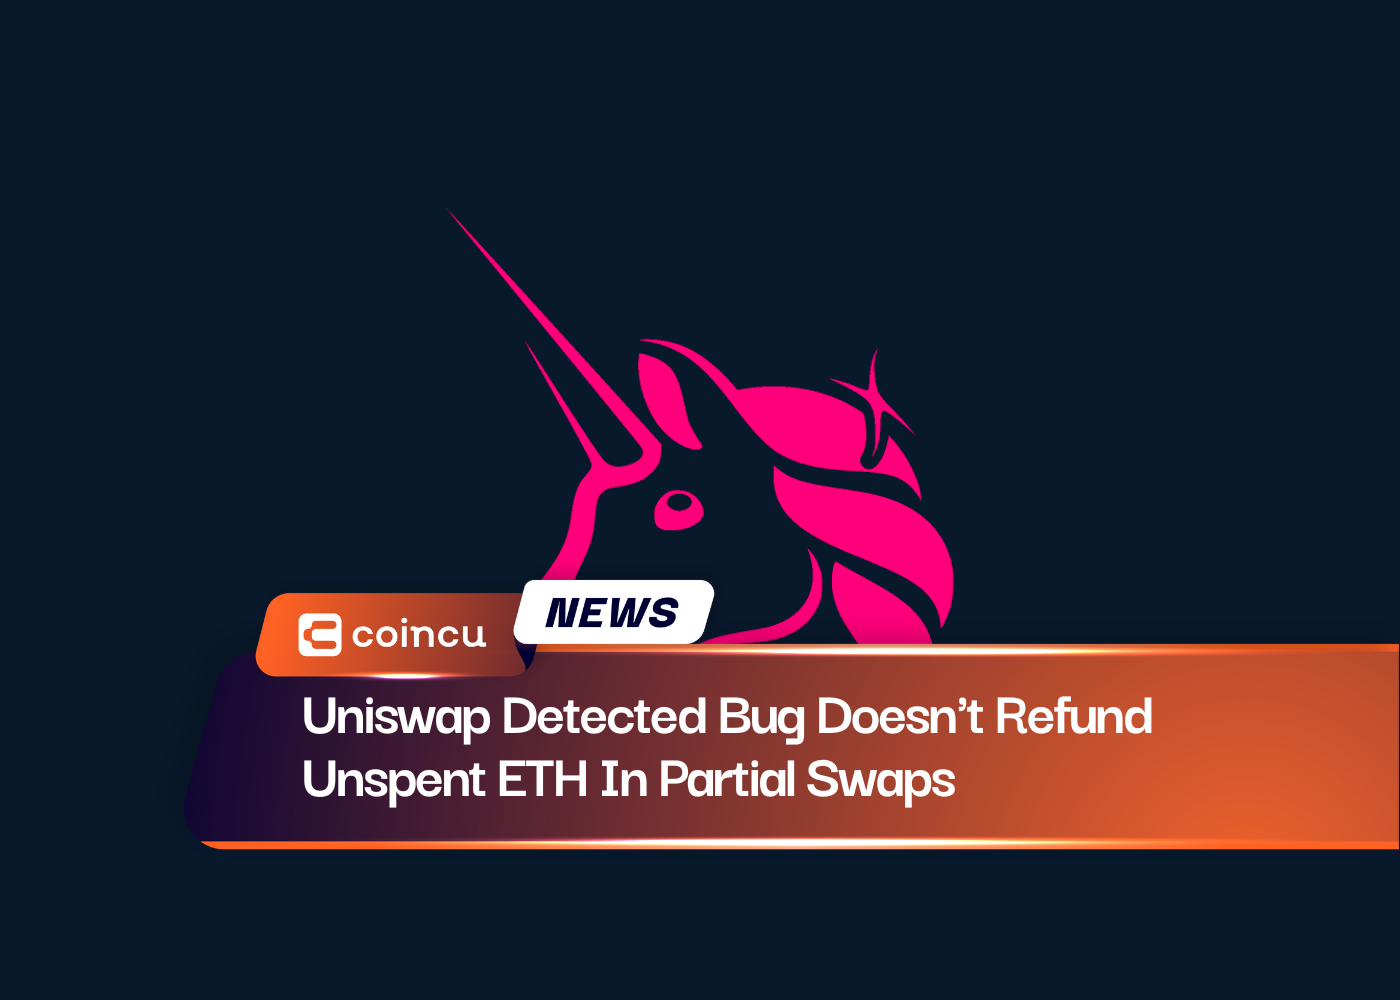 Uniswap Detected Bug Doesn't Refund Unspent ETH In Partial Swaps